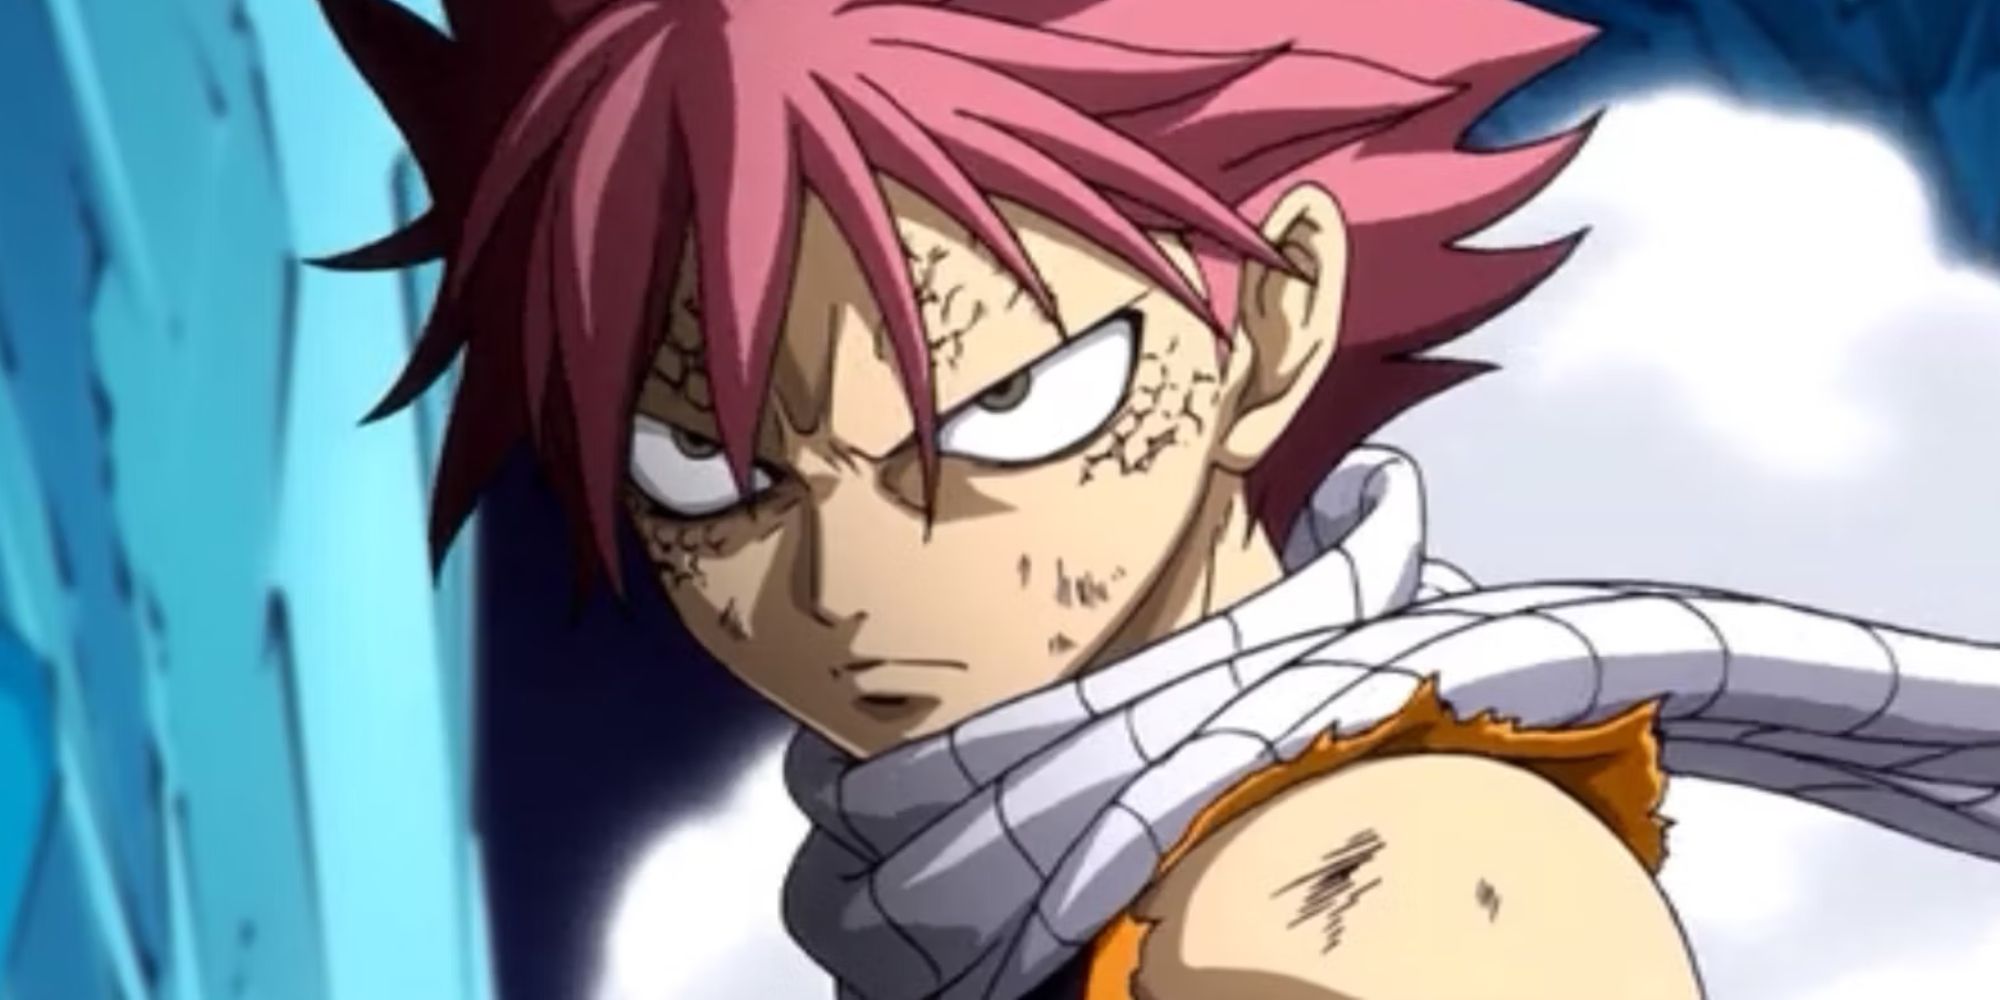 Natsu Dragneel at the Tower of Heaven, after eating a lot of concentrated ethernano.